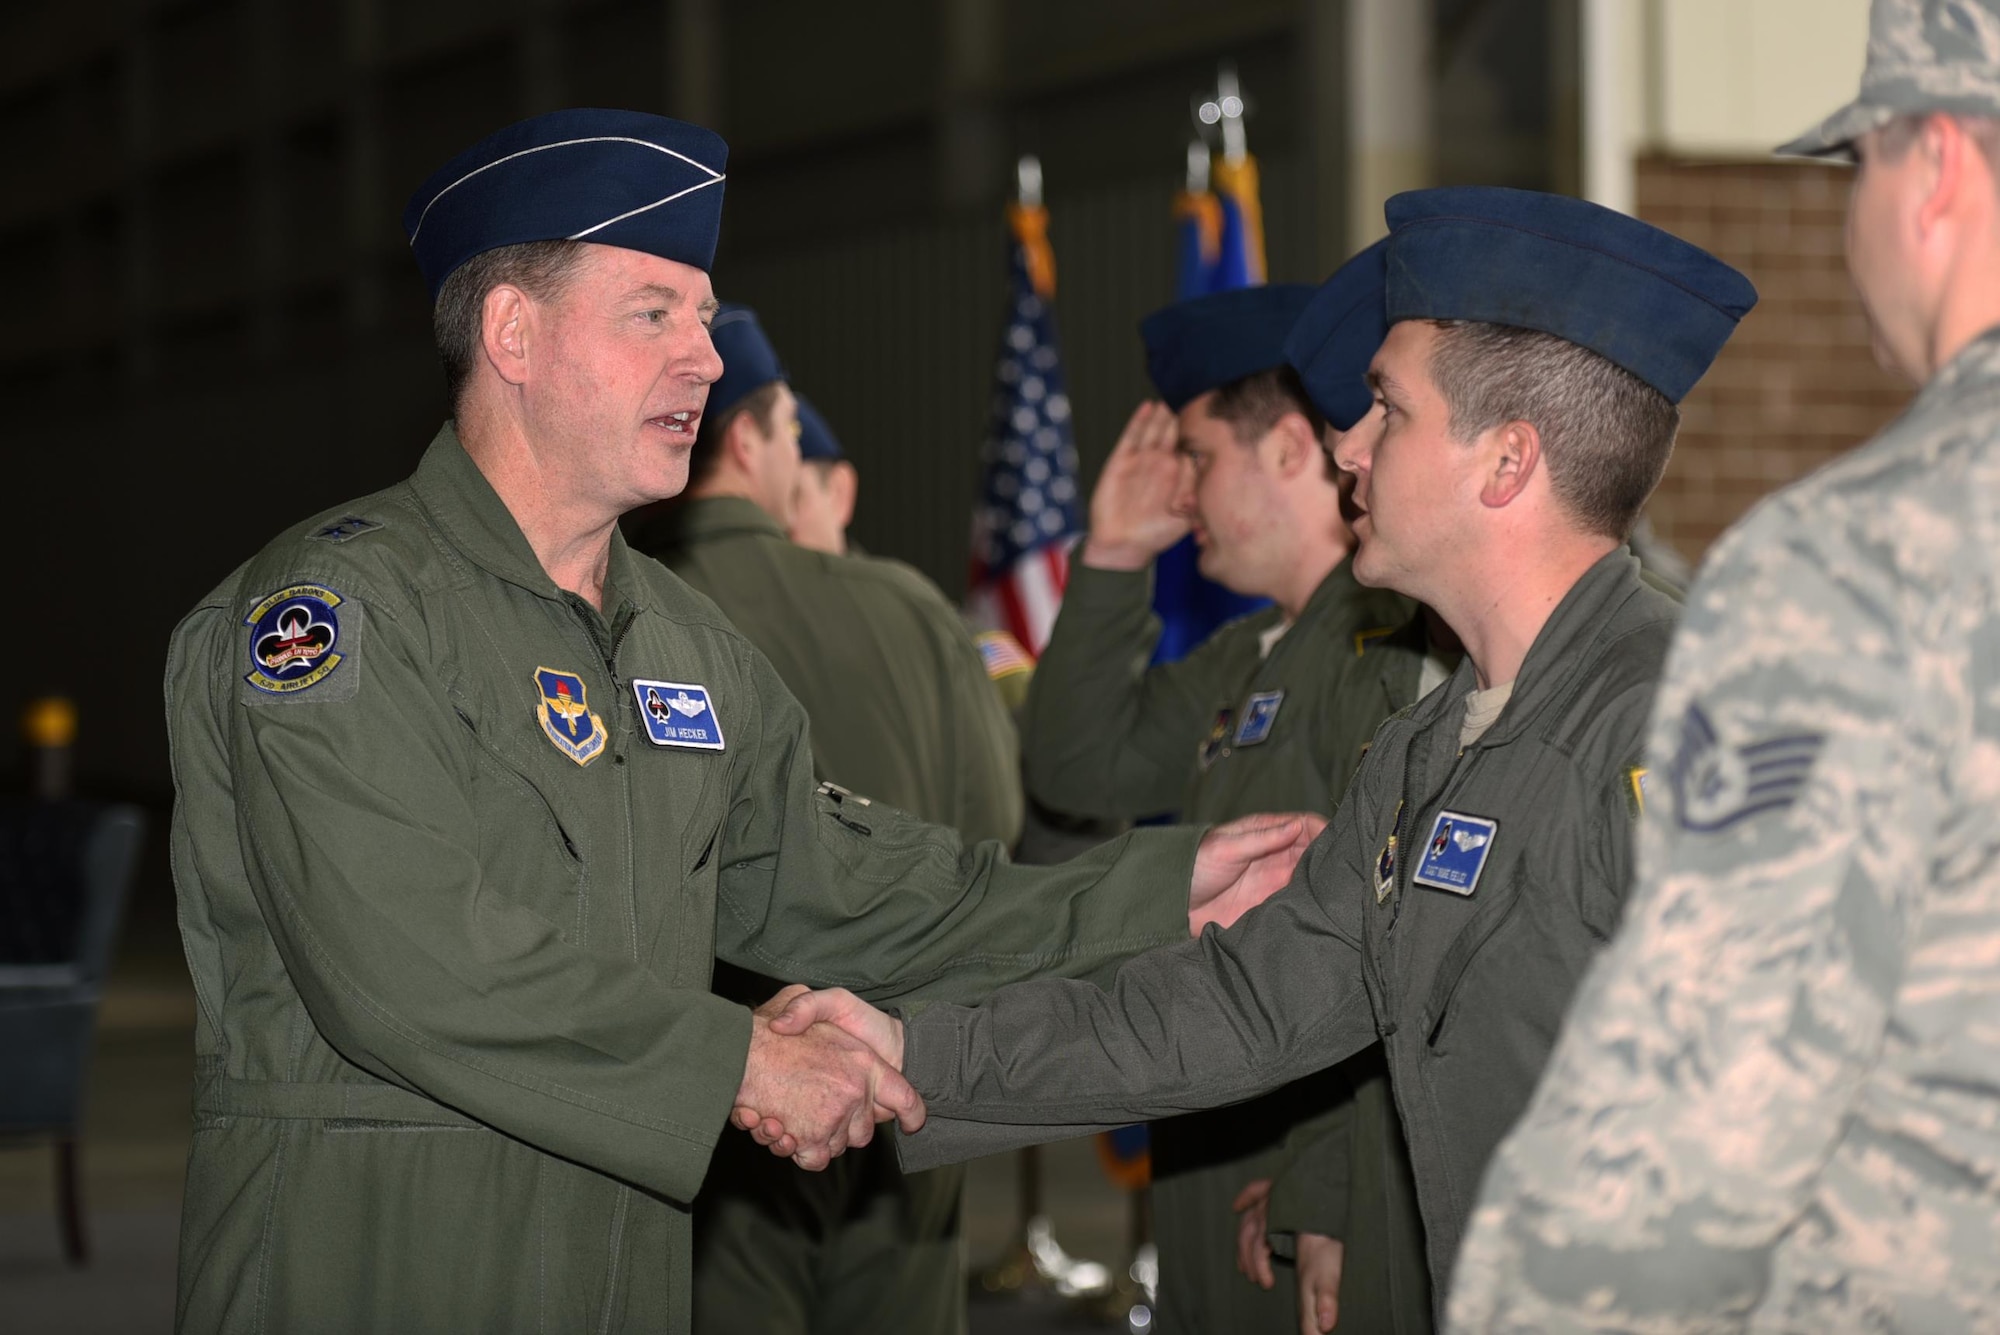 U.S. Air Force Maj. Gen. James Hecker, 19th Air Force commander, congratulates the aircrew and maintainers of the C-130J delivery team Feb. 27, 2017, at Little Rock Air Force Base, Ark. The aircrew members aided in the delivery of the newest C-130J to the 314th Airlift Wing fleet. (U.S. Air Force photo by Airman 1st Class Kevin Sommer Giron)